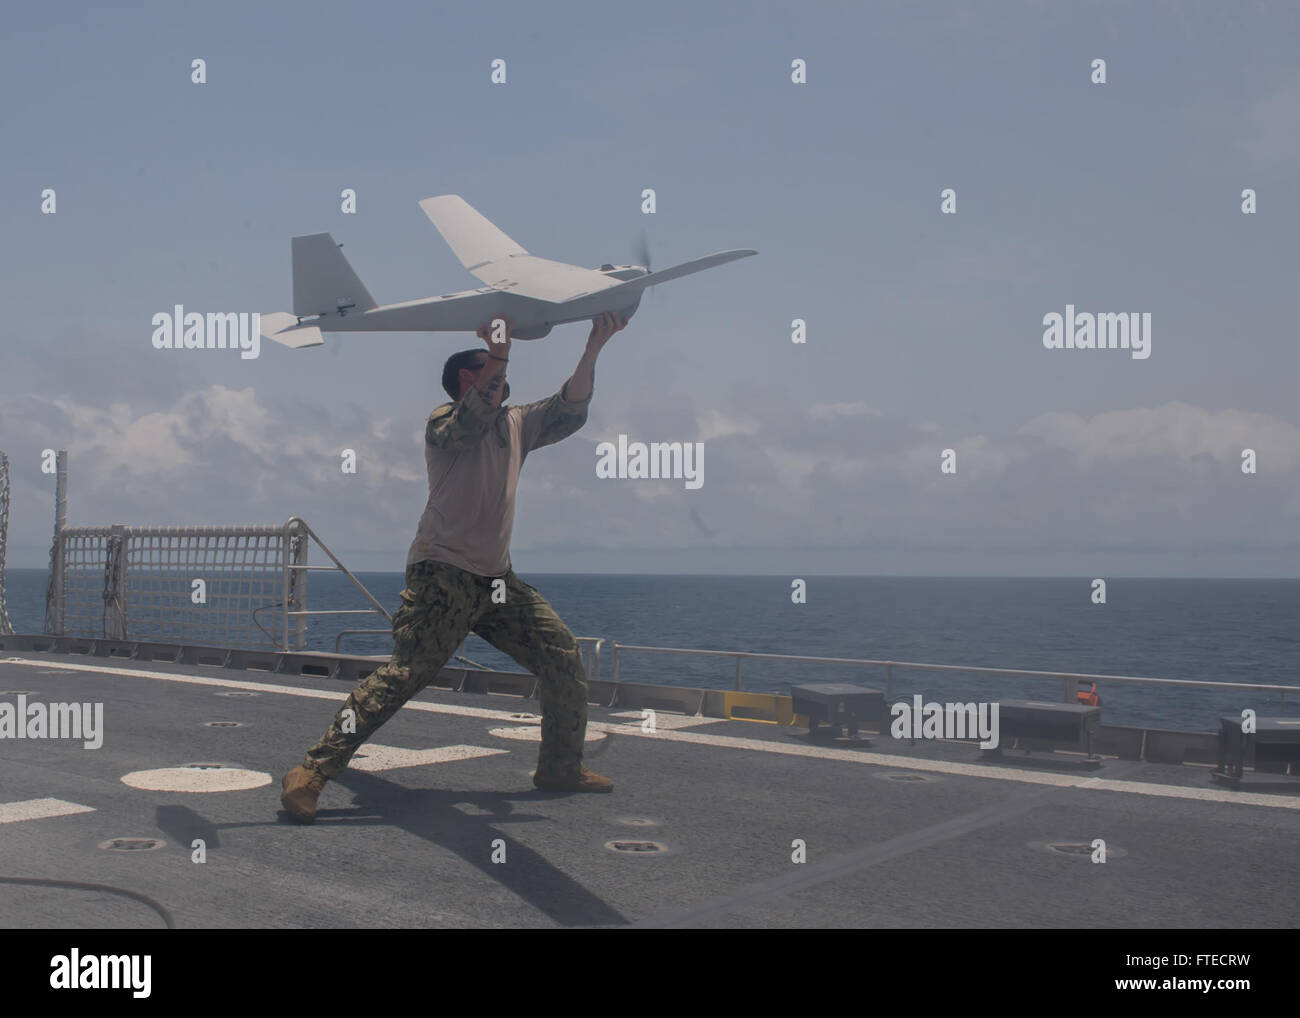 140327-N-ZY039-012  GULF OF GUINEA (March 27, 2014) - Fire Controlman 2nd Class Dustin Gower assigned to the PUMA unmanned aerial vehicle (UAV) detachment aboard joint, high-speed vessel USNS Spearhead (JHSV 1) throws a UAV during flight operationsas part of a U.S.-Ghana combined maritime law enforcement operation under the African Maritime Law Enforcement Partnership (AMLEP) program. AMLEP, the operational phase of Africa Partnership Station (APS), brings together U.S. Navy, U.S. Coastguard, and respective Africa partner maritime forces to actively patrol that partner's territorial waters and Stock Photo